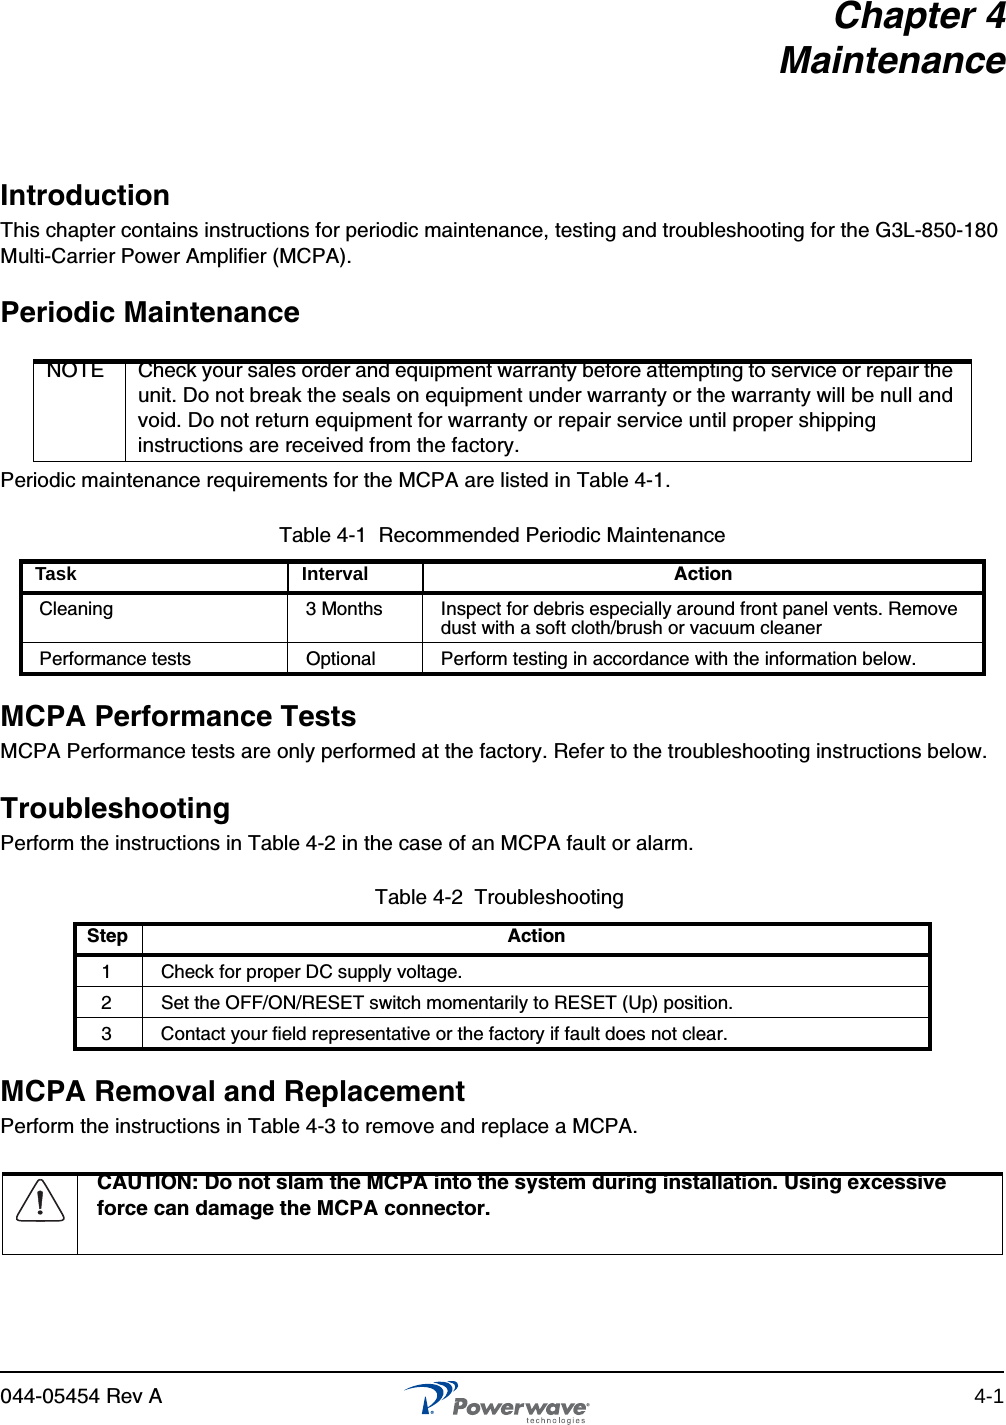 044-05454 Rev A 4-1Chapter 4MaintenanceIntroductionThis chapter contains instructions for periodic maintenance, testing and troubleshooting for the G3L-850-180 Multi-Carrier Power Amplifier (MCPA).Periodic MaintenancePeriodic maintenance requirements for the MCPA are listed in Table 4-1.MCPA Performance TestsMCPA Performance tests are only performed at the factory. Refer to the troubleshooting instructions below.TroubleshootingPerform the instructions in Table 4-2 in the case of an MCPA fault or alarm.MCPA Removal and ReplacementPerform the instructions in Table 4-3 to remove and replace a MCPA.NOTE Check your sales order and equipment warranty before attempting to service or repair the unit. Do not break the seals on equipment under warranty or the warranty will be null and void. Do not return equipment for warranty or repair service until proper shipping instructions are received from the factory.Table 4-1  Recommended Periodic MaintenanceTask Interval ActionCleaning  3 Months Inspect for debris especially around front panel vents. Remove dust with a soft cloth/brush or vacuum cleanerPerformance tests Optional Perform testing in accordance with the information below.Table 4-2  Troubleshooting Step Action1Check for proper DC supply voltage.2Set the OFF/ON/RESET switch momentarily to RESET (Up) position.3Contact your field representative or the factory if fault does not clear.CAUTION: Do not slam the MCPA into the system during installation. Using excessive force can damage the MCPA connector.